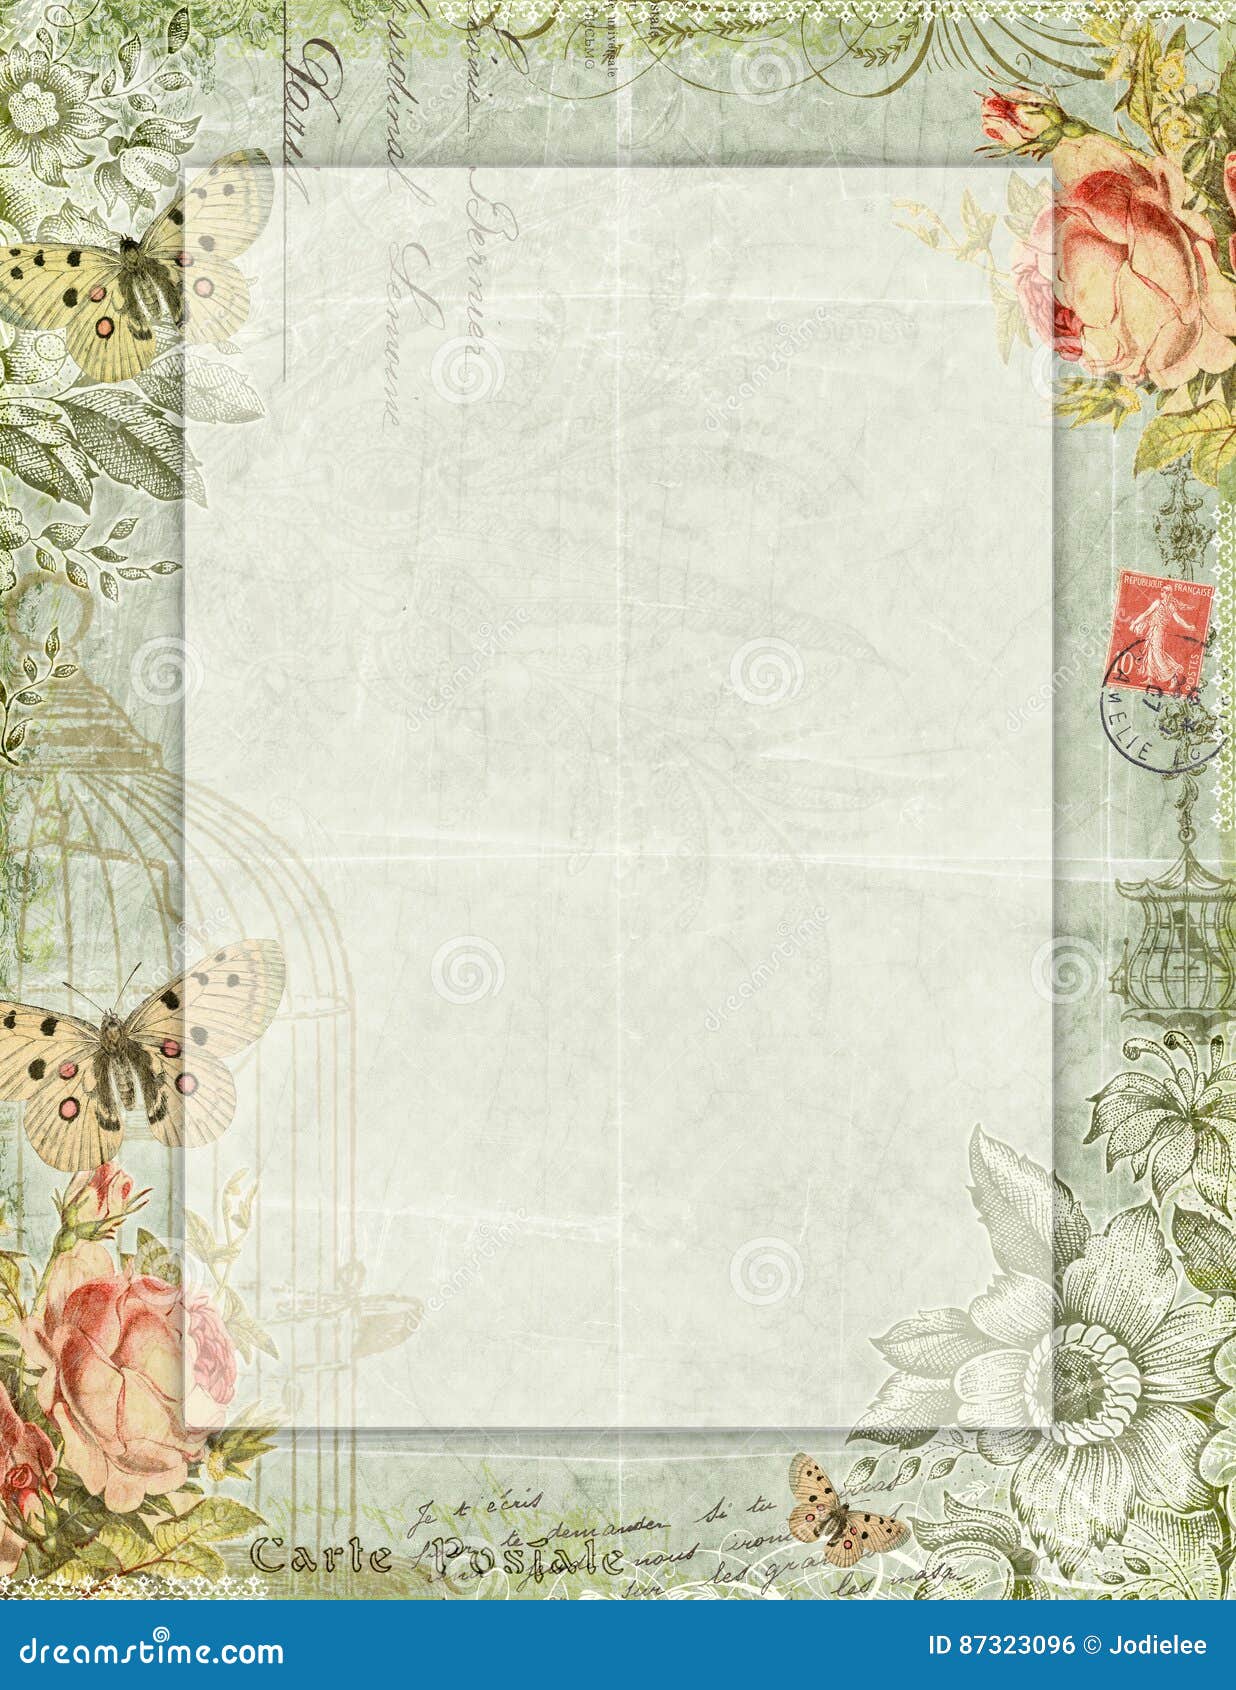 Printable Vintage Shabby Chic Style Floral Stationary With Butterflies Stock Illustration Illustration Of Floral Book 87323096